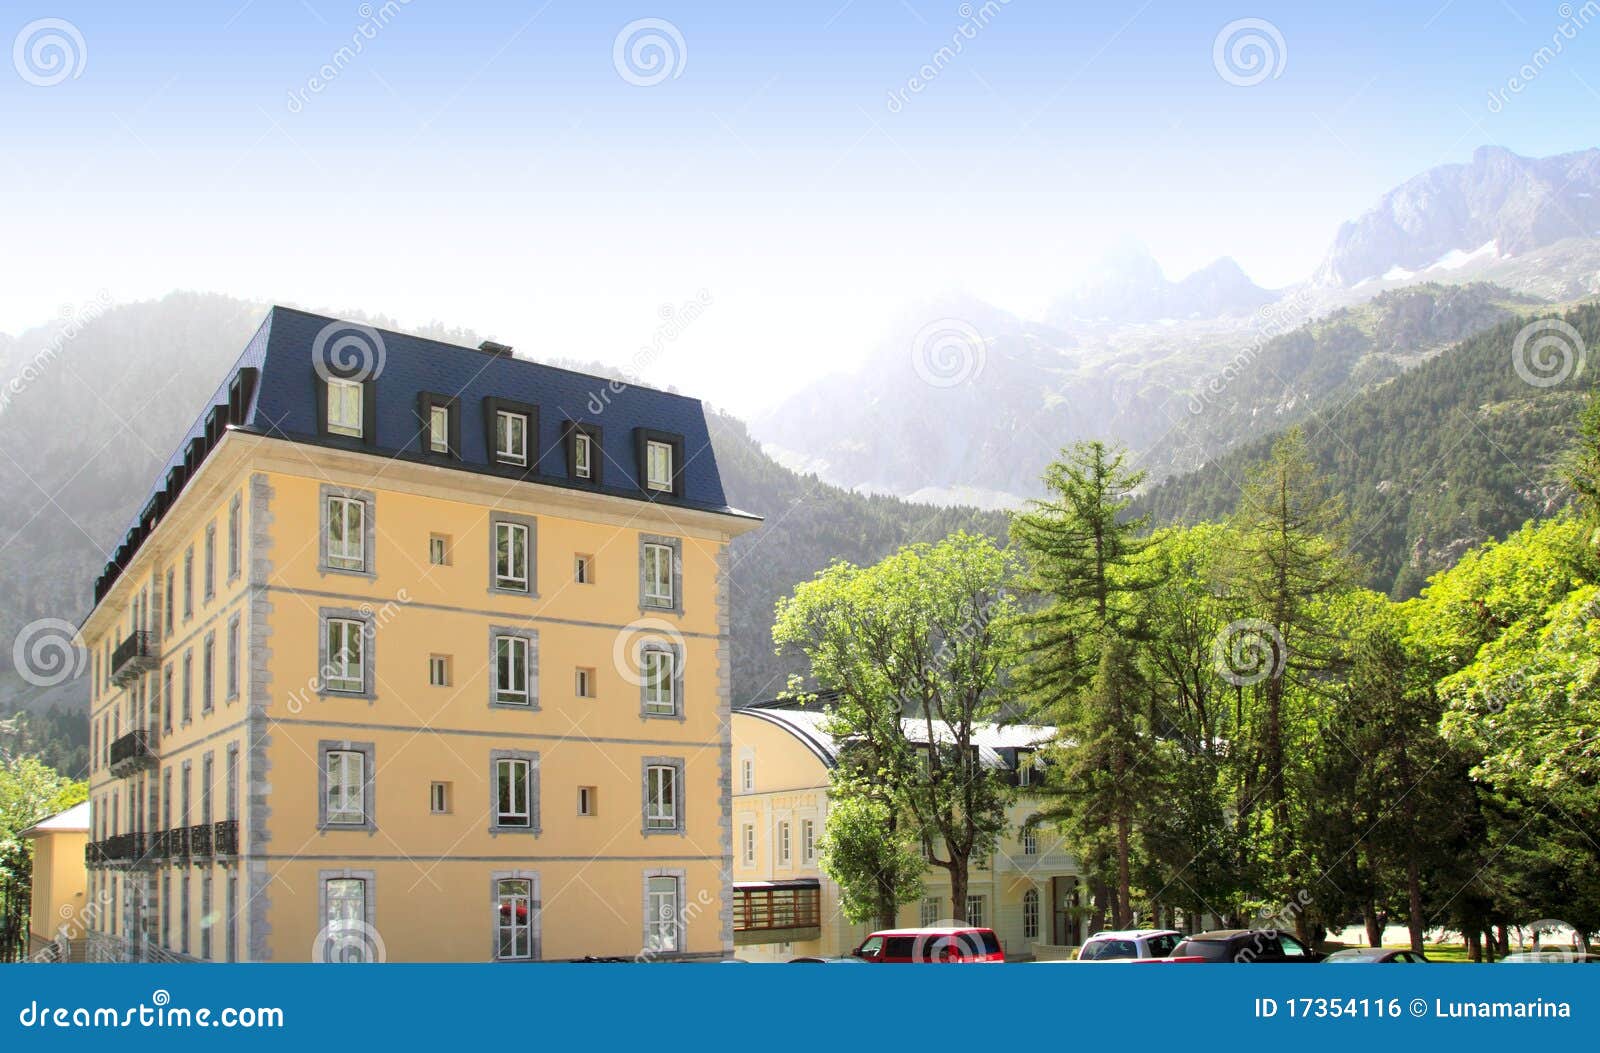 panticosa balneary landscape and buildings